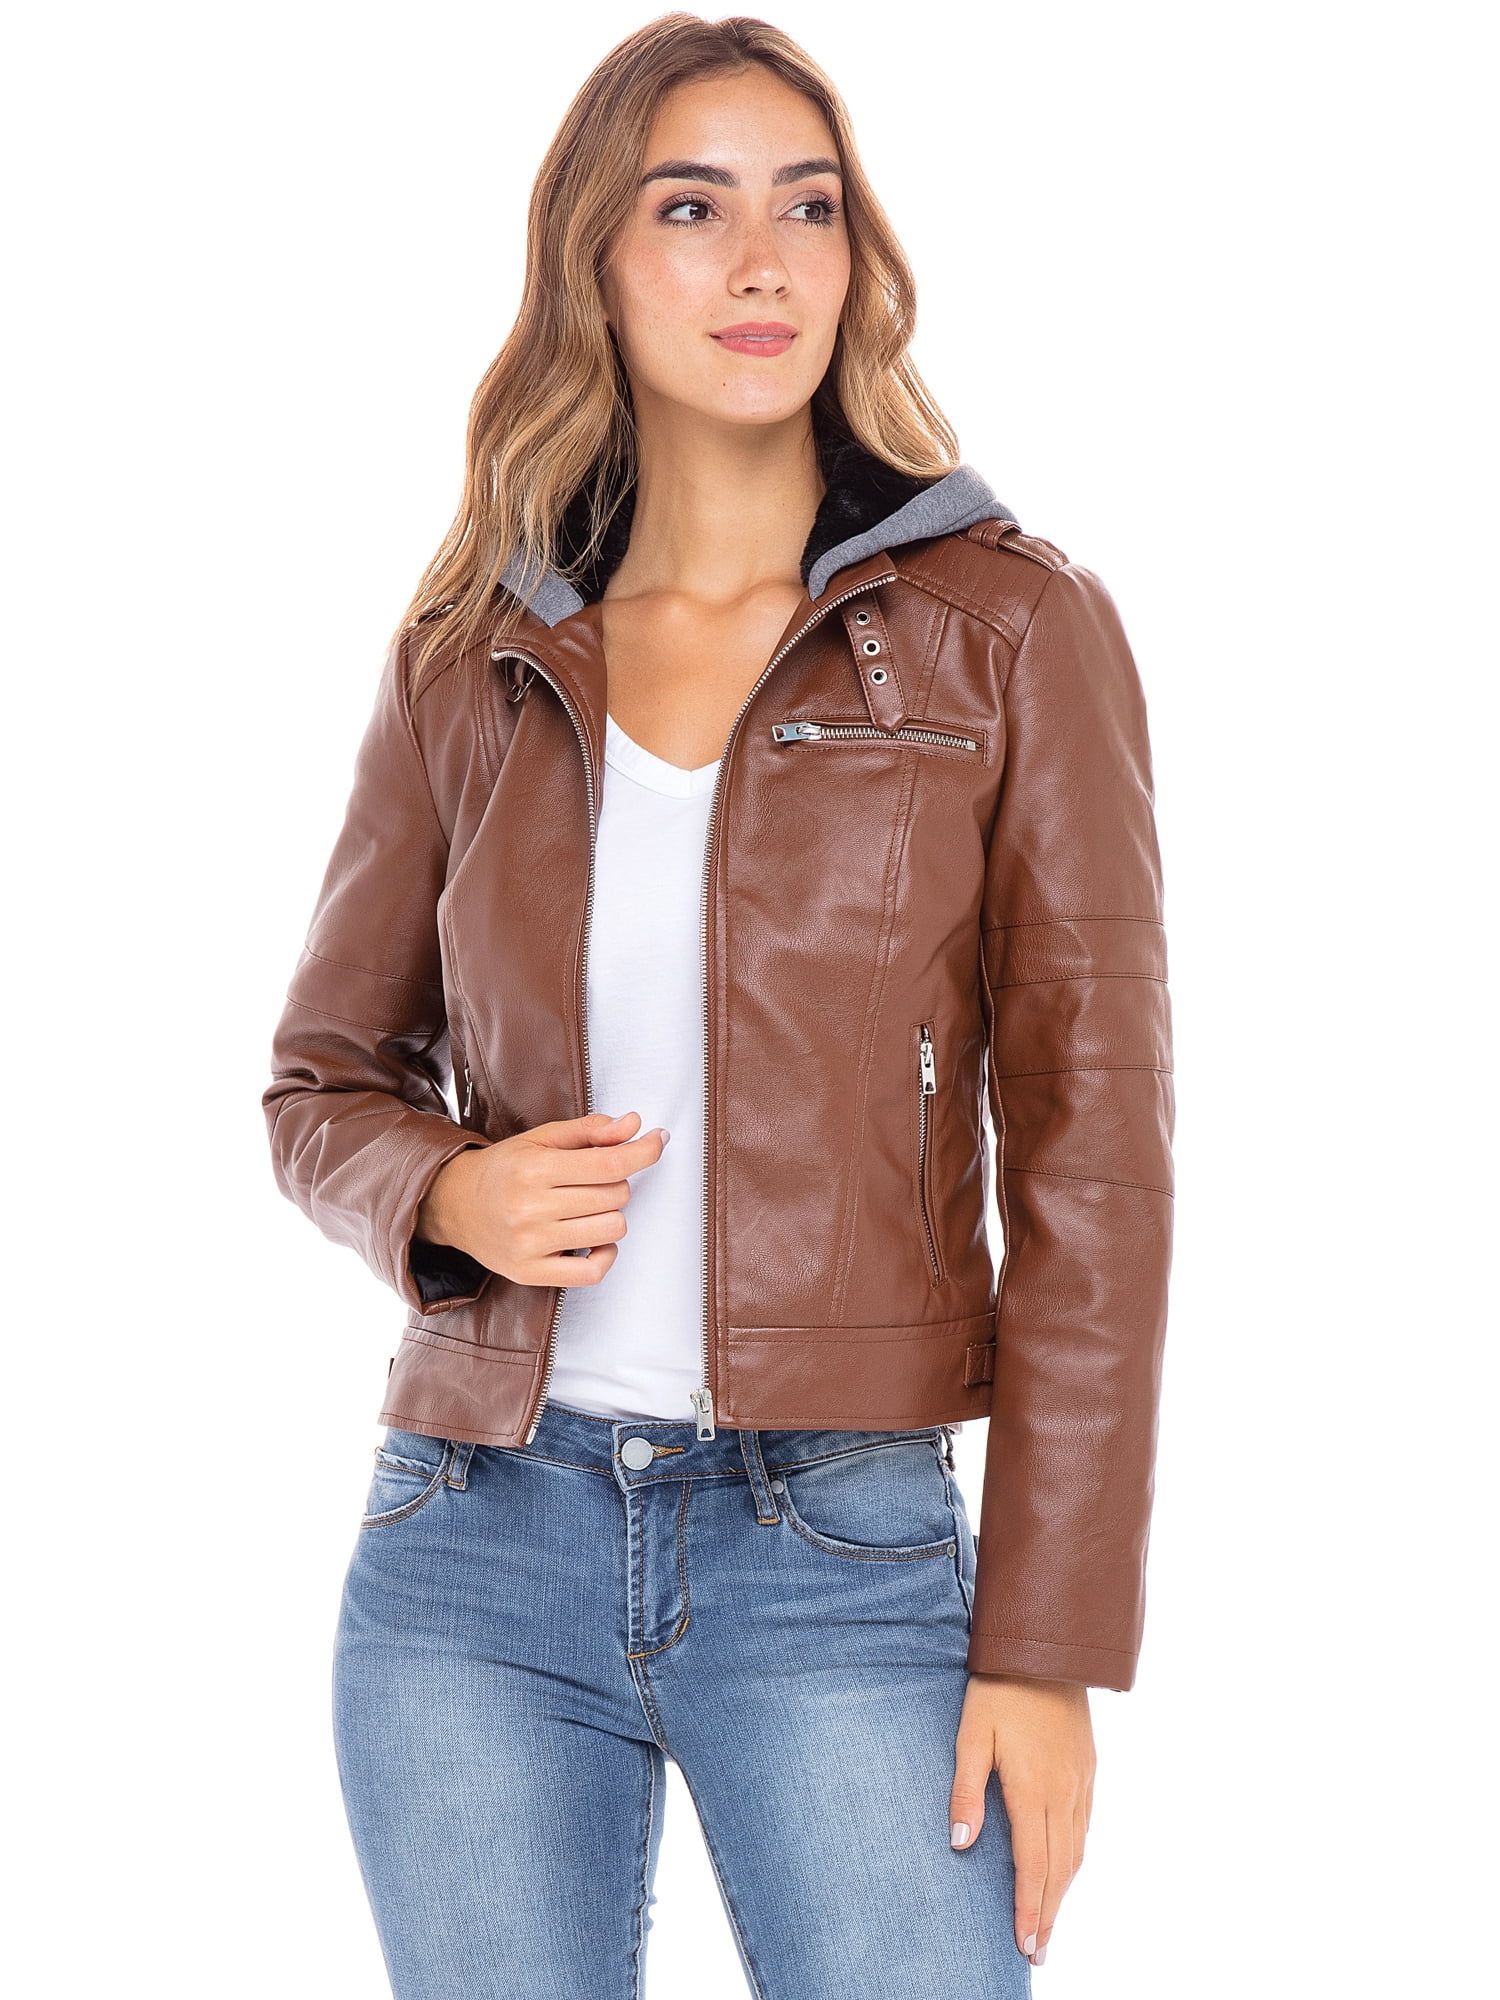 Stolen Hearts Womens Faux Leather Jacket with Faux Fur Lining and Fleece Hood | Walmart (US)